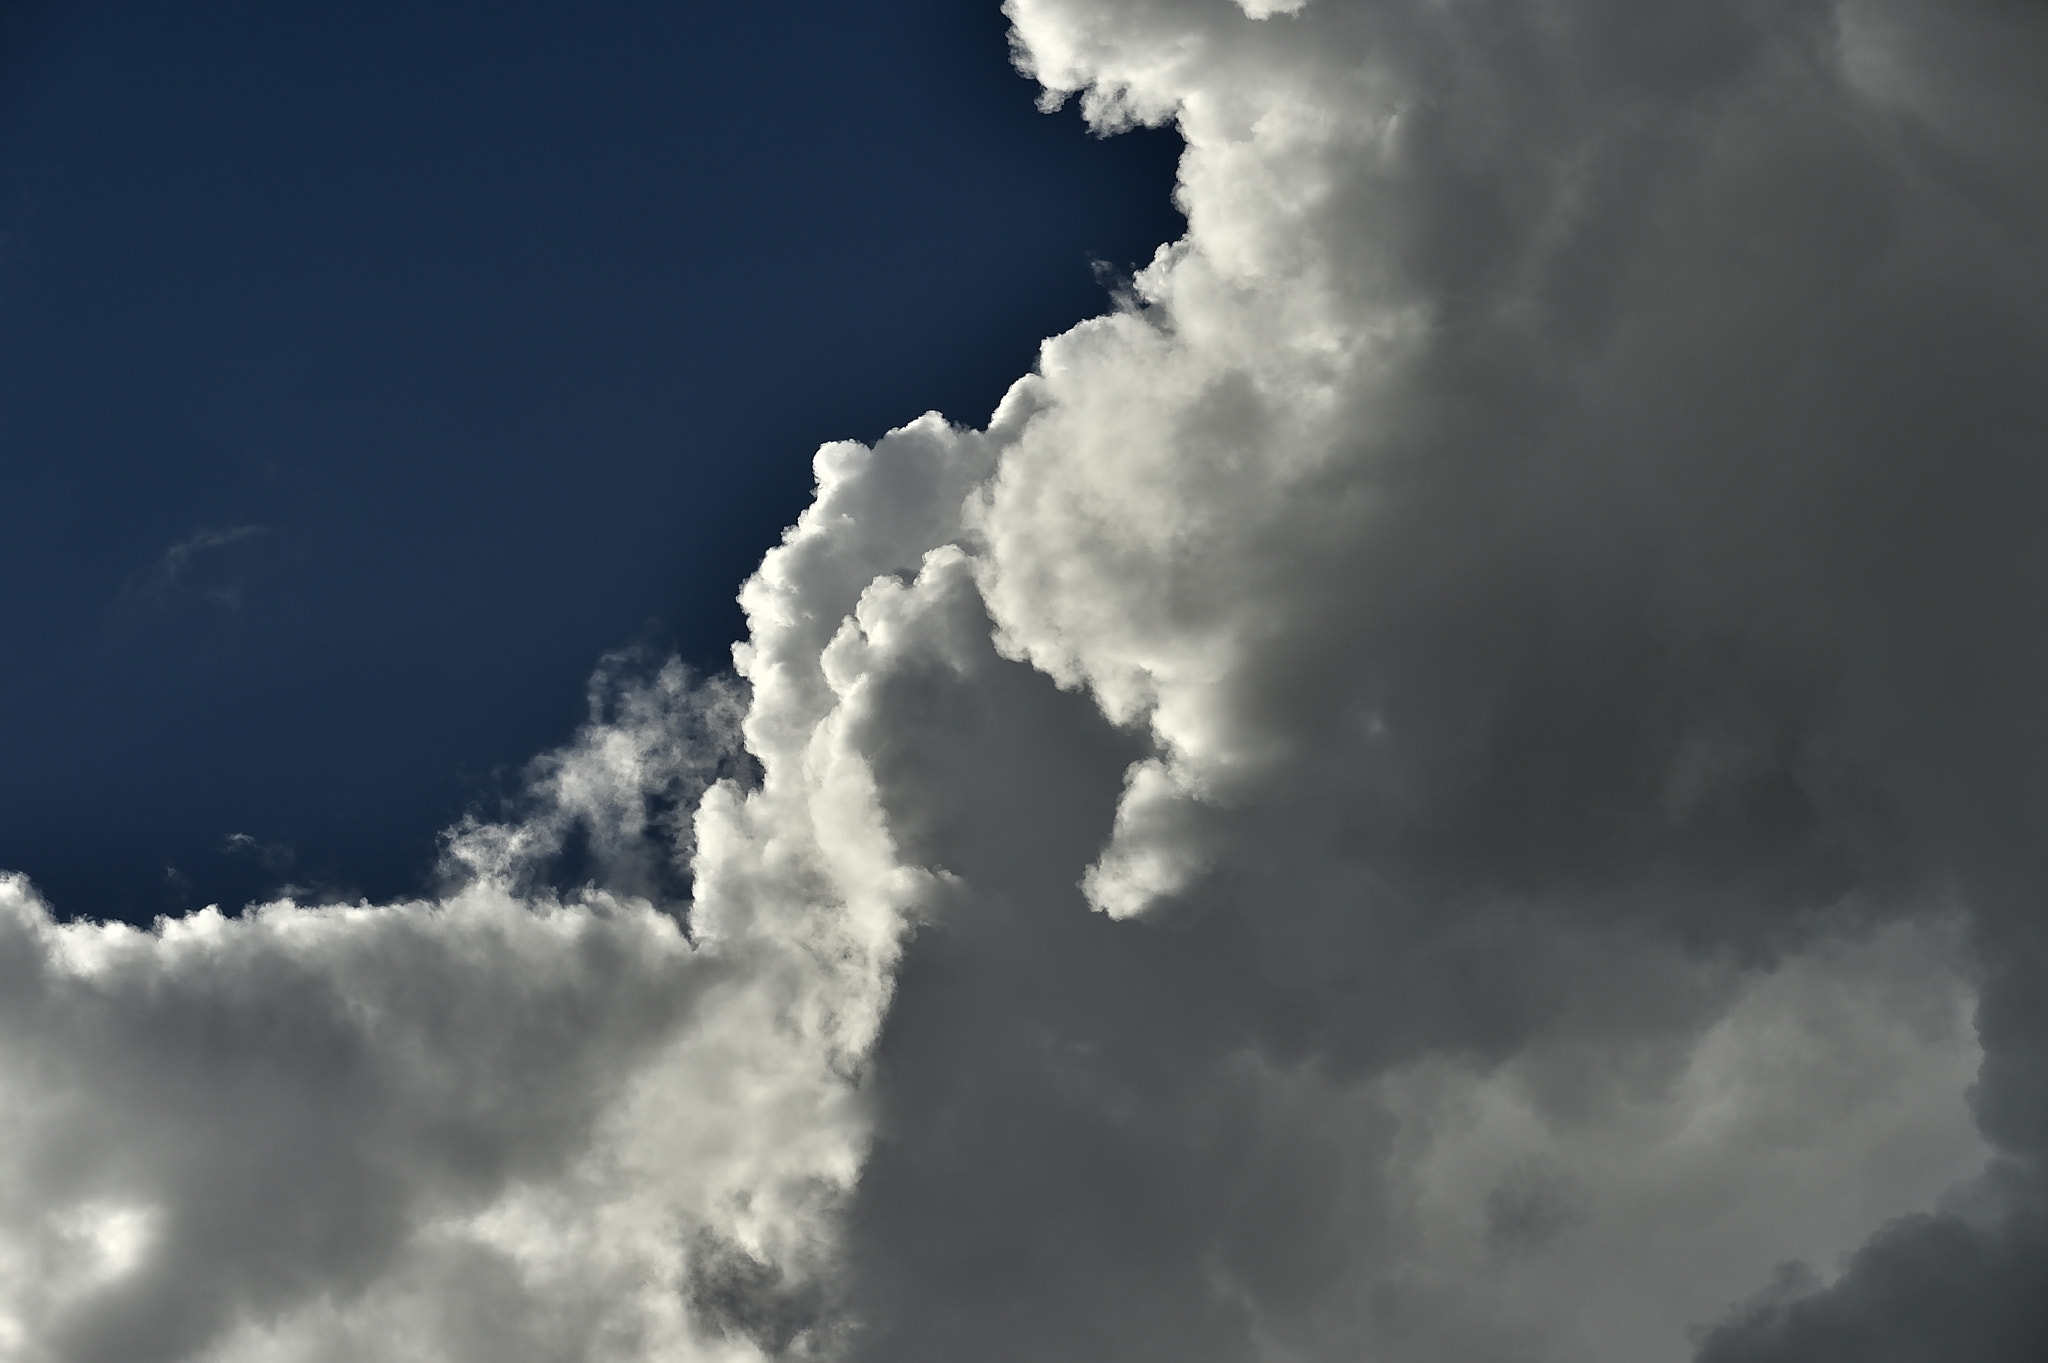 Nikon Df sample photo. After storm, beautiful cumulus formations. photography